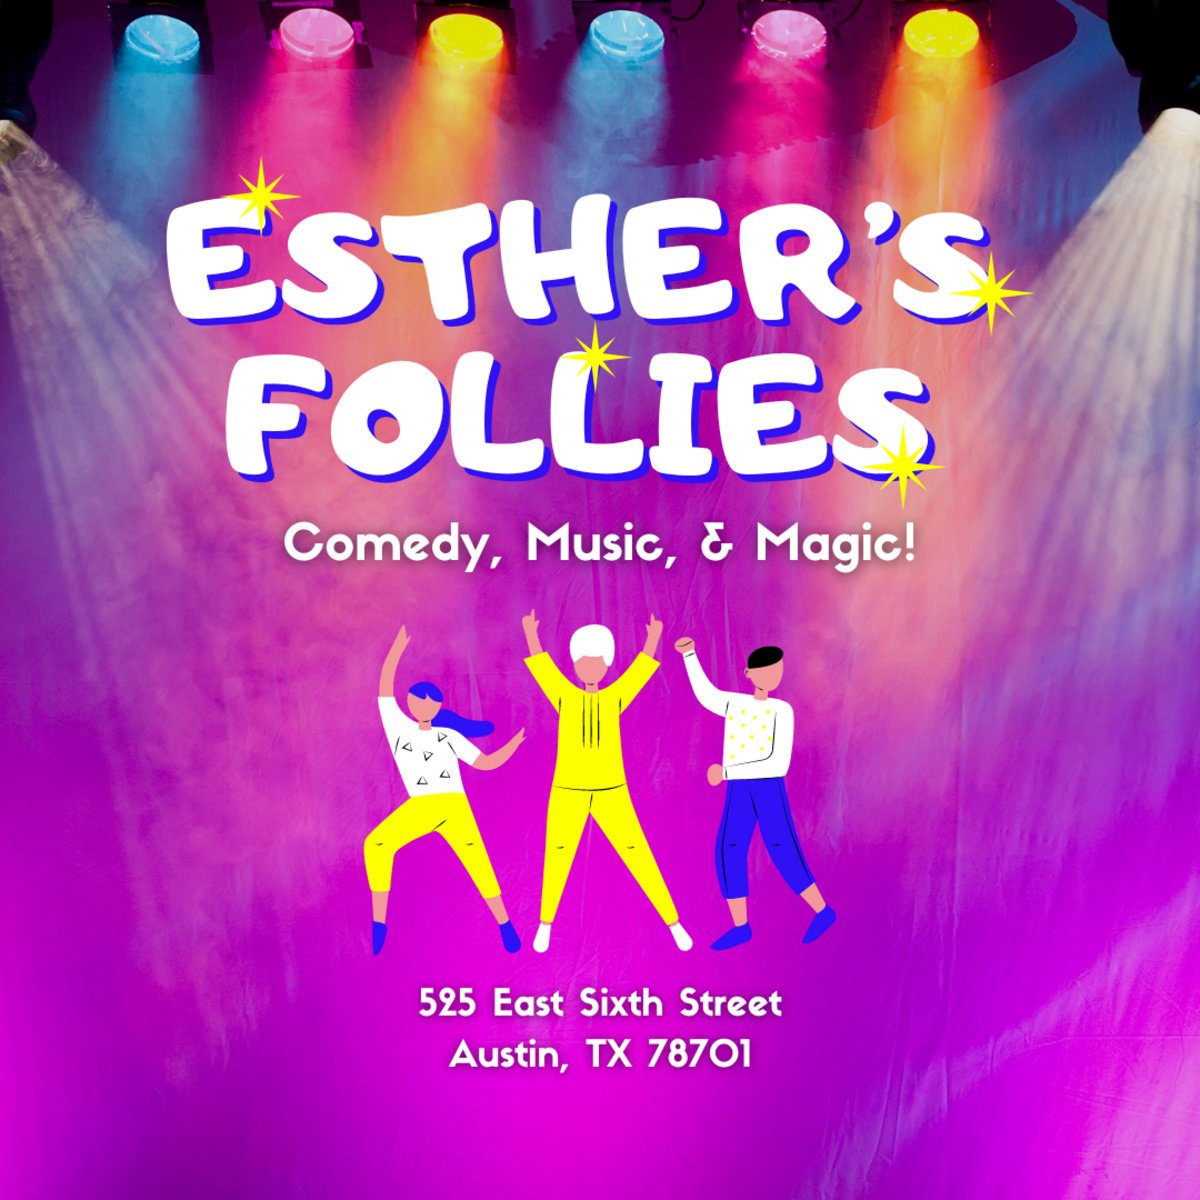 Ready for a night of laughs? Don't miss #EsthersFollies, #Austin's #1 #comedytroupe, just 10 minutes from #BWPAustinCentral! With sketches, magic, and musical numbers, plus fine dining options, it's the perfect addition to your #SixthStreet adventure! bit.ly/3VWuBCi